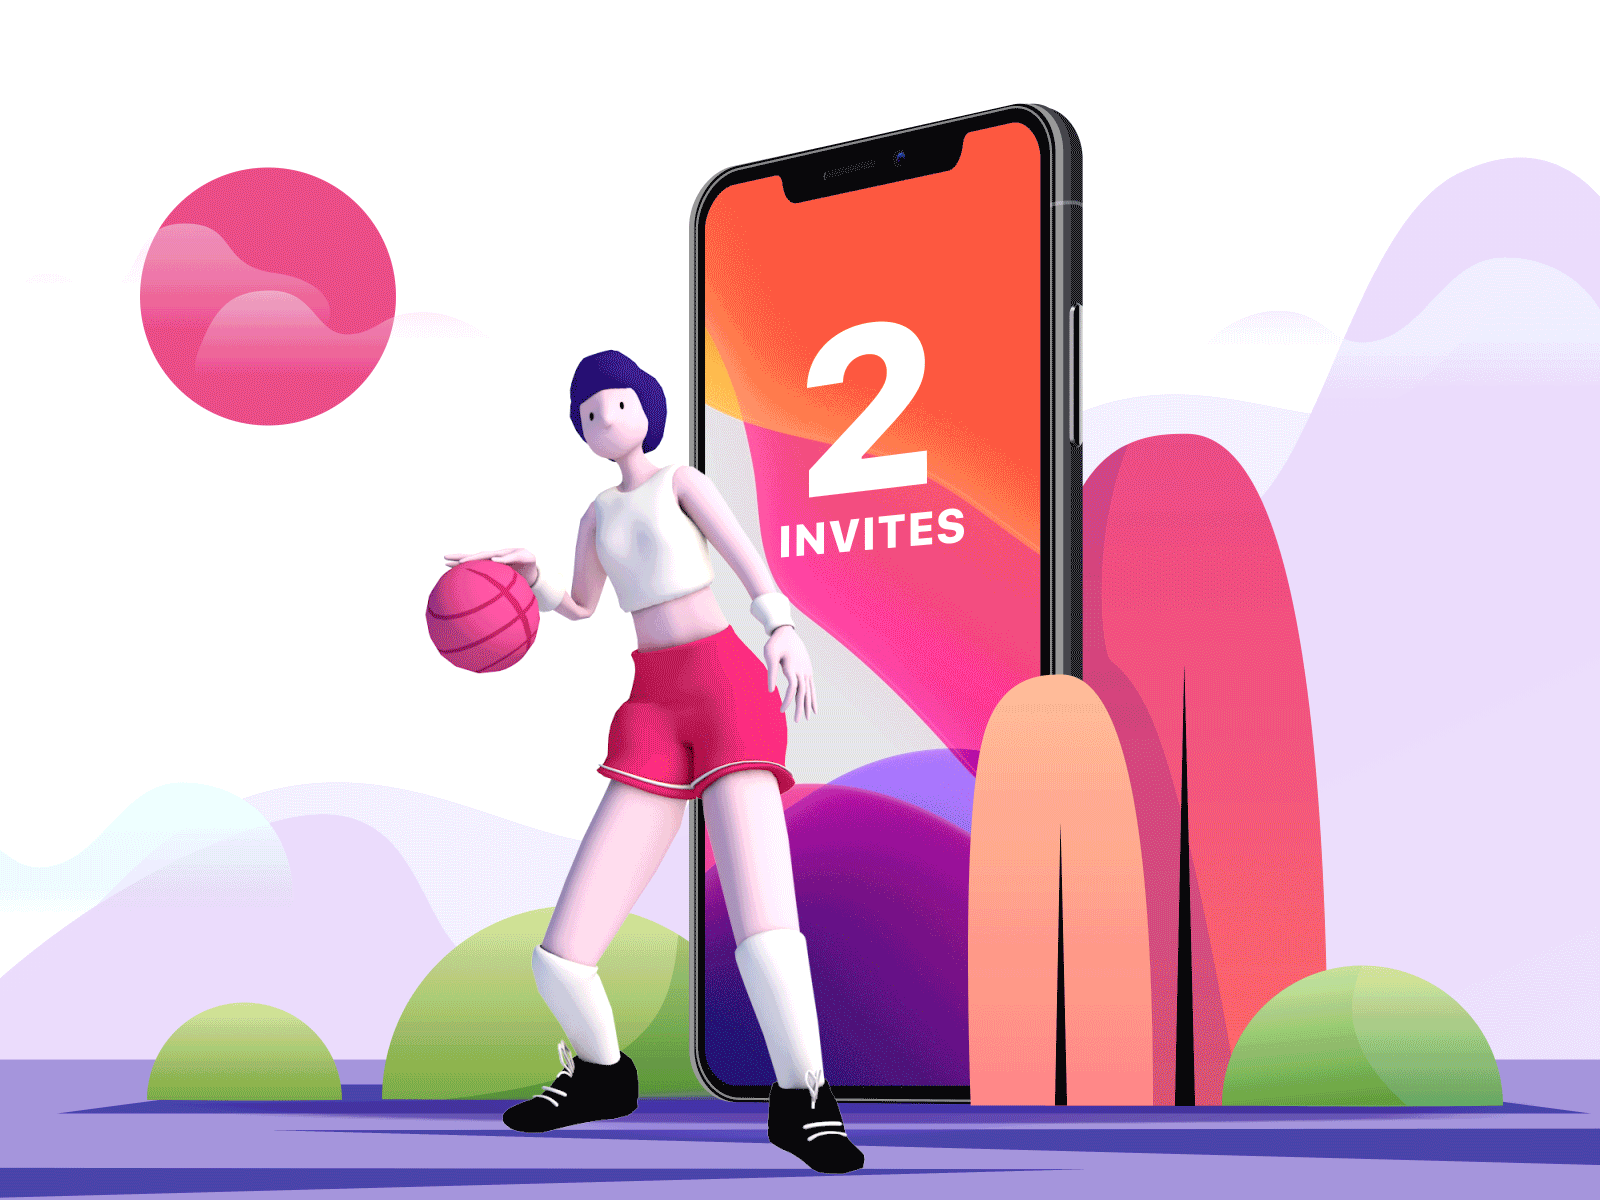 Dribbble invite giveaway character dribbble dribbble best shot dribbble invitation dribbble invite dribbble invites dribble illustration